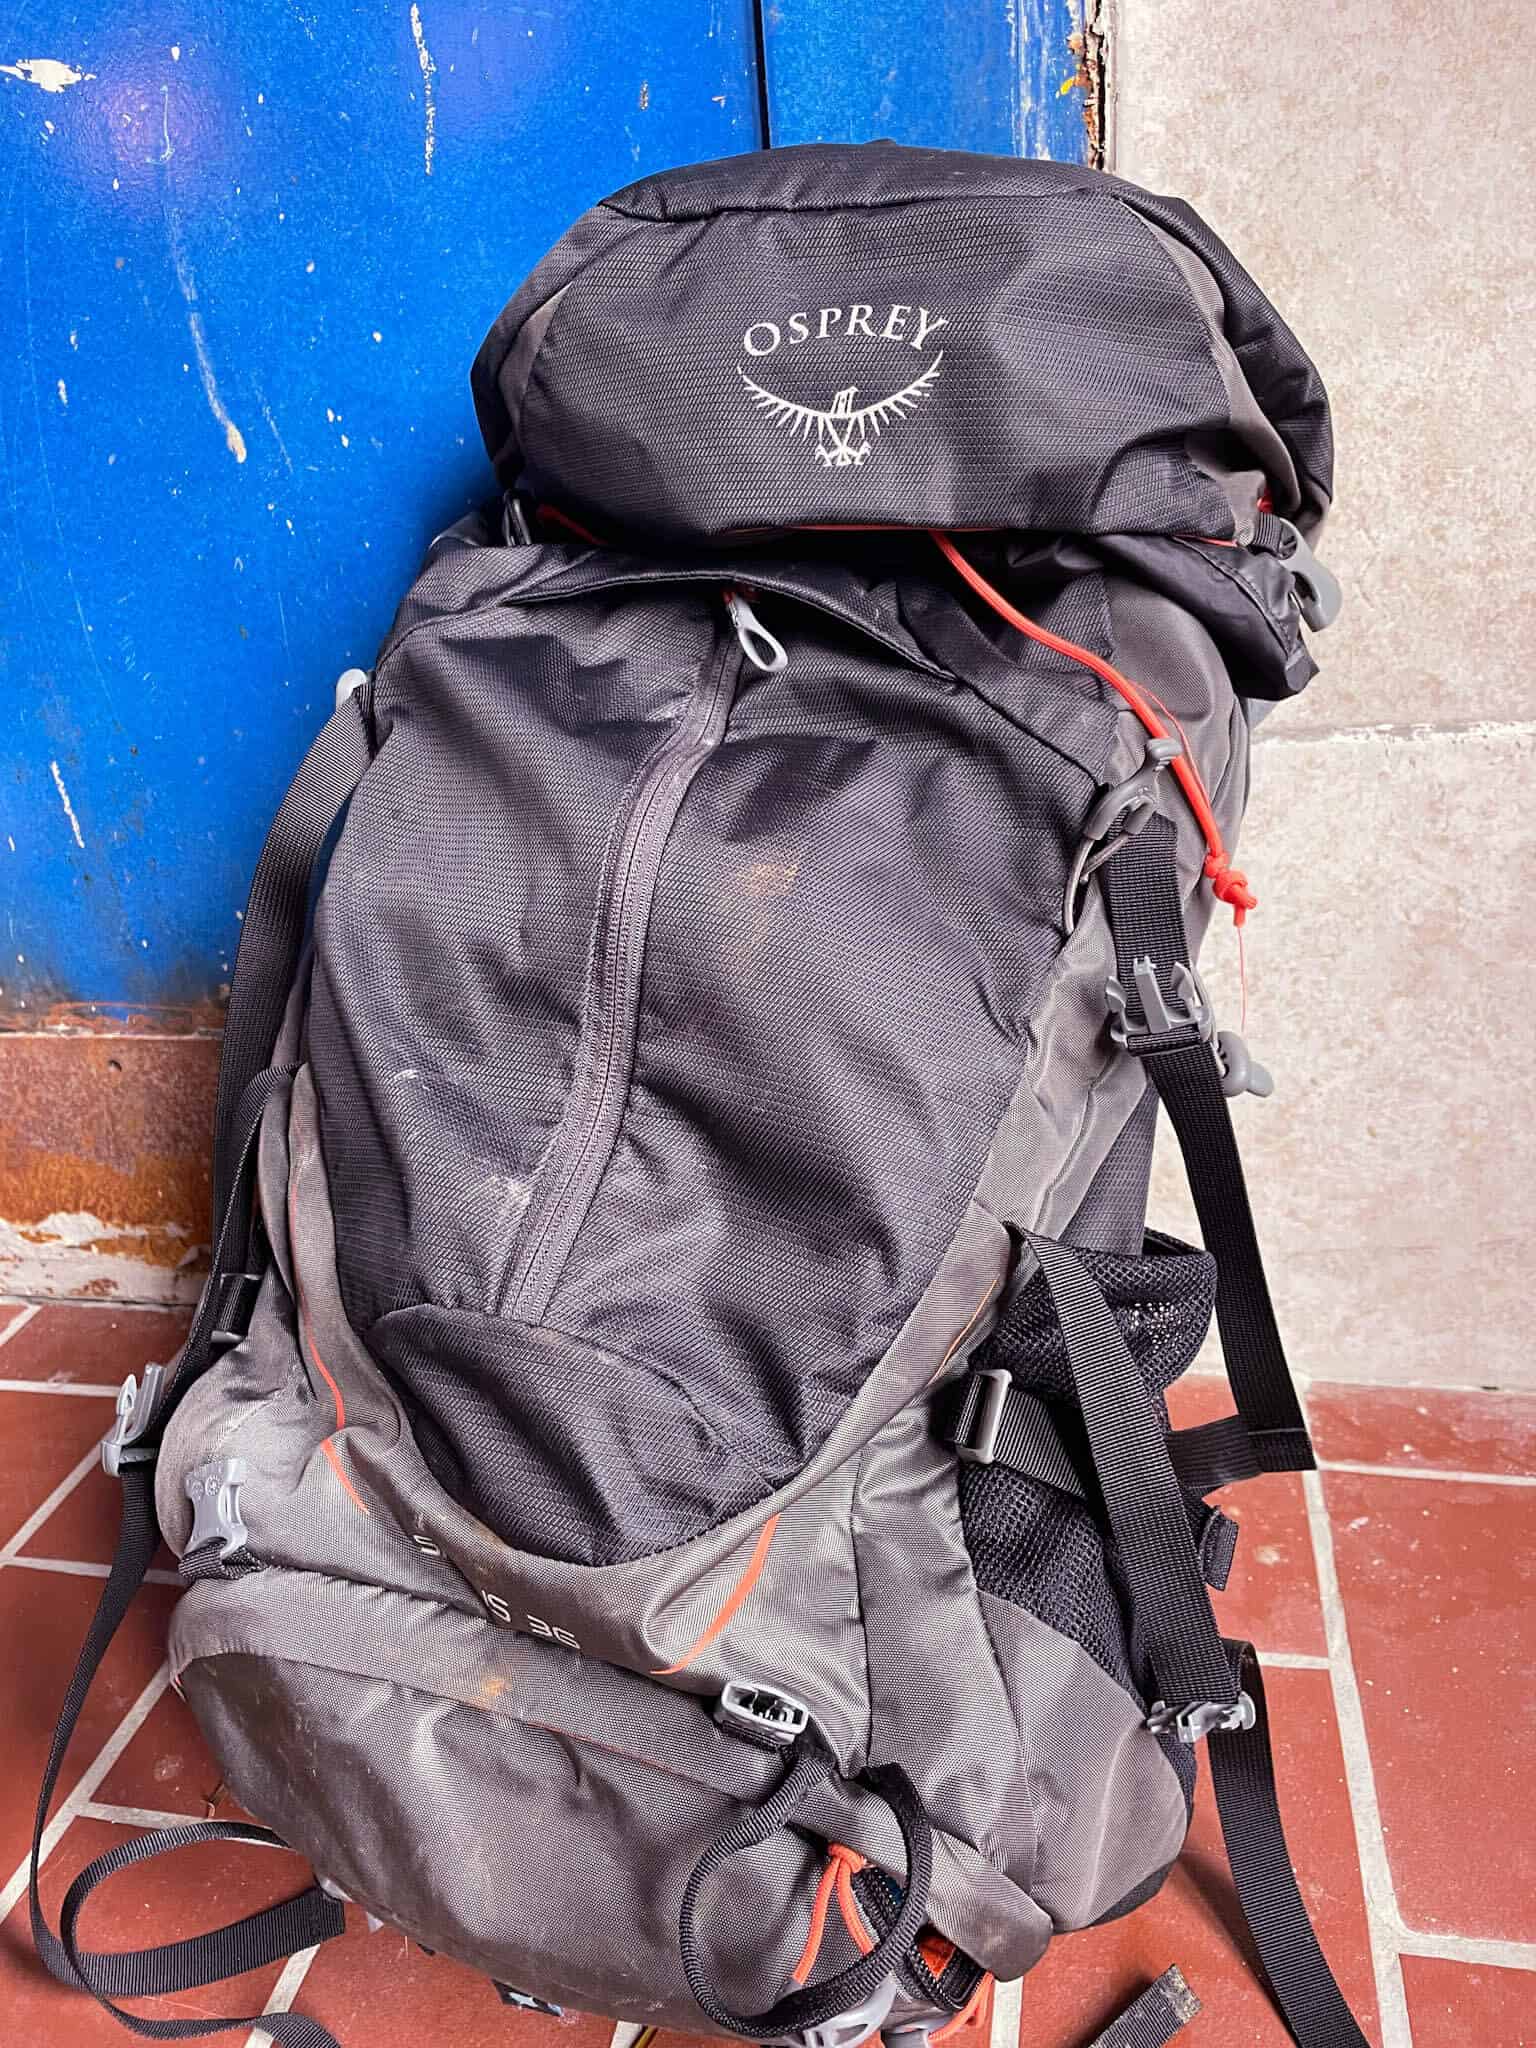 How to Clean an Osprey Backpack